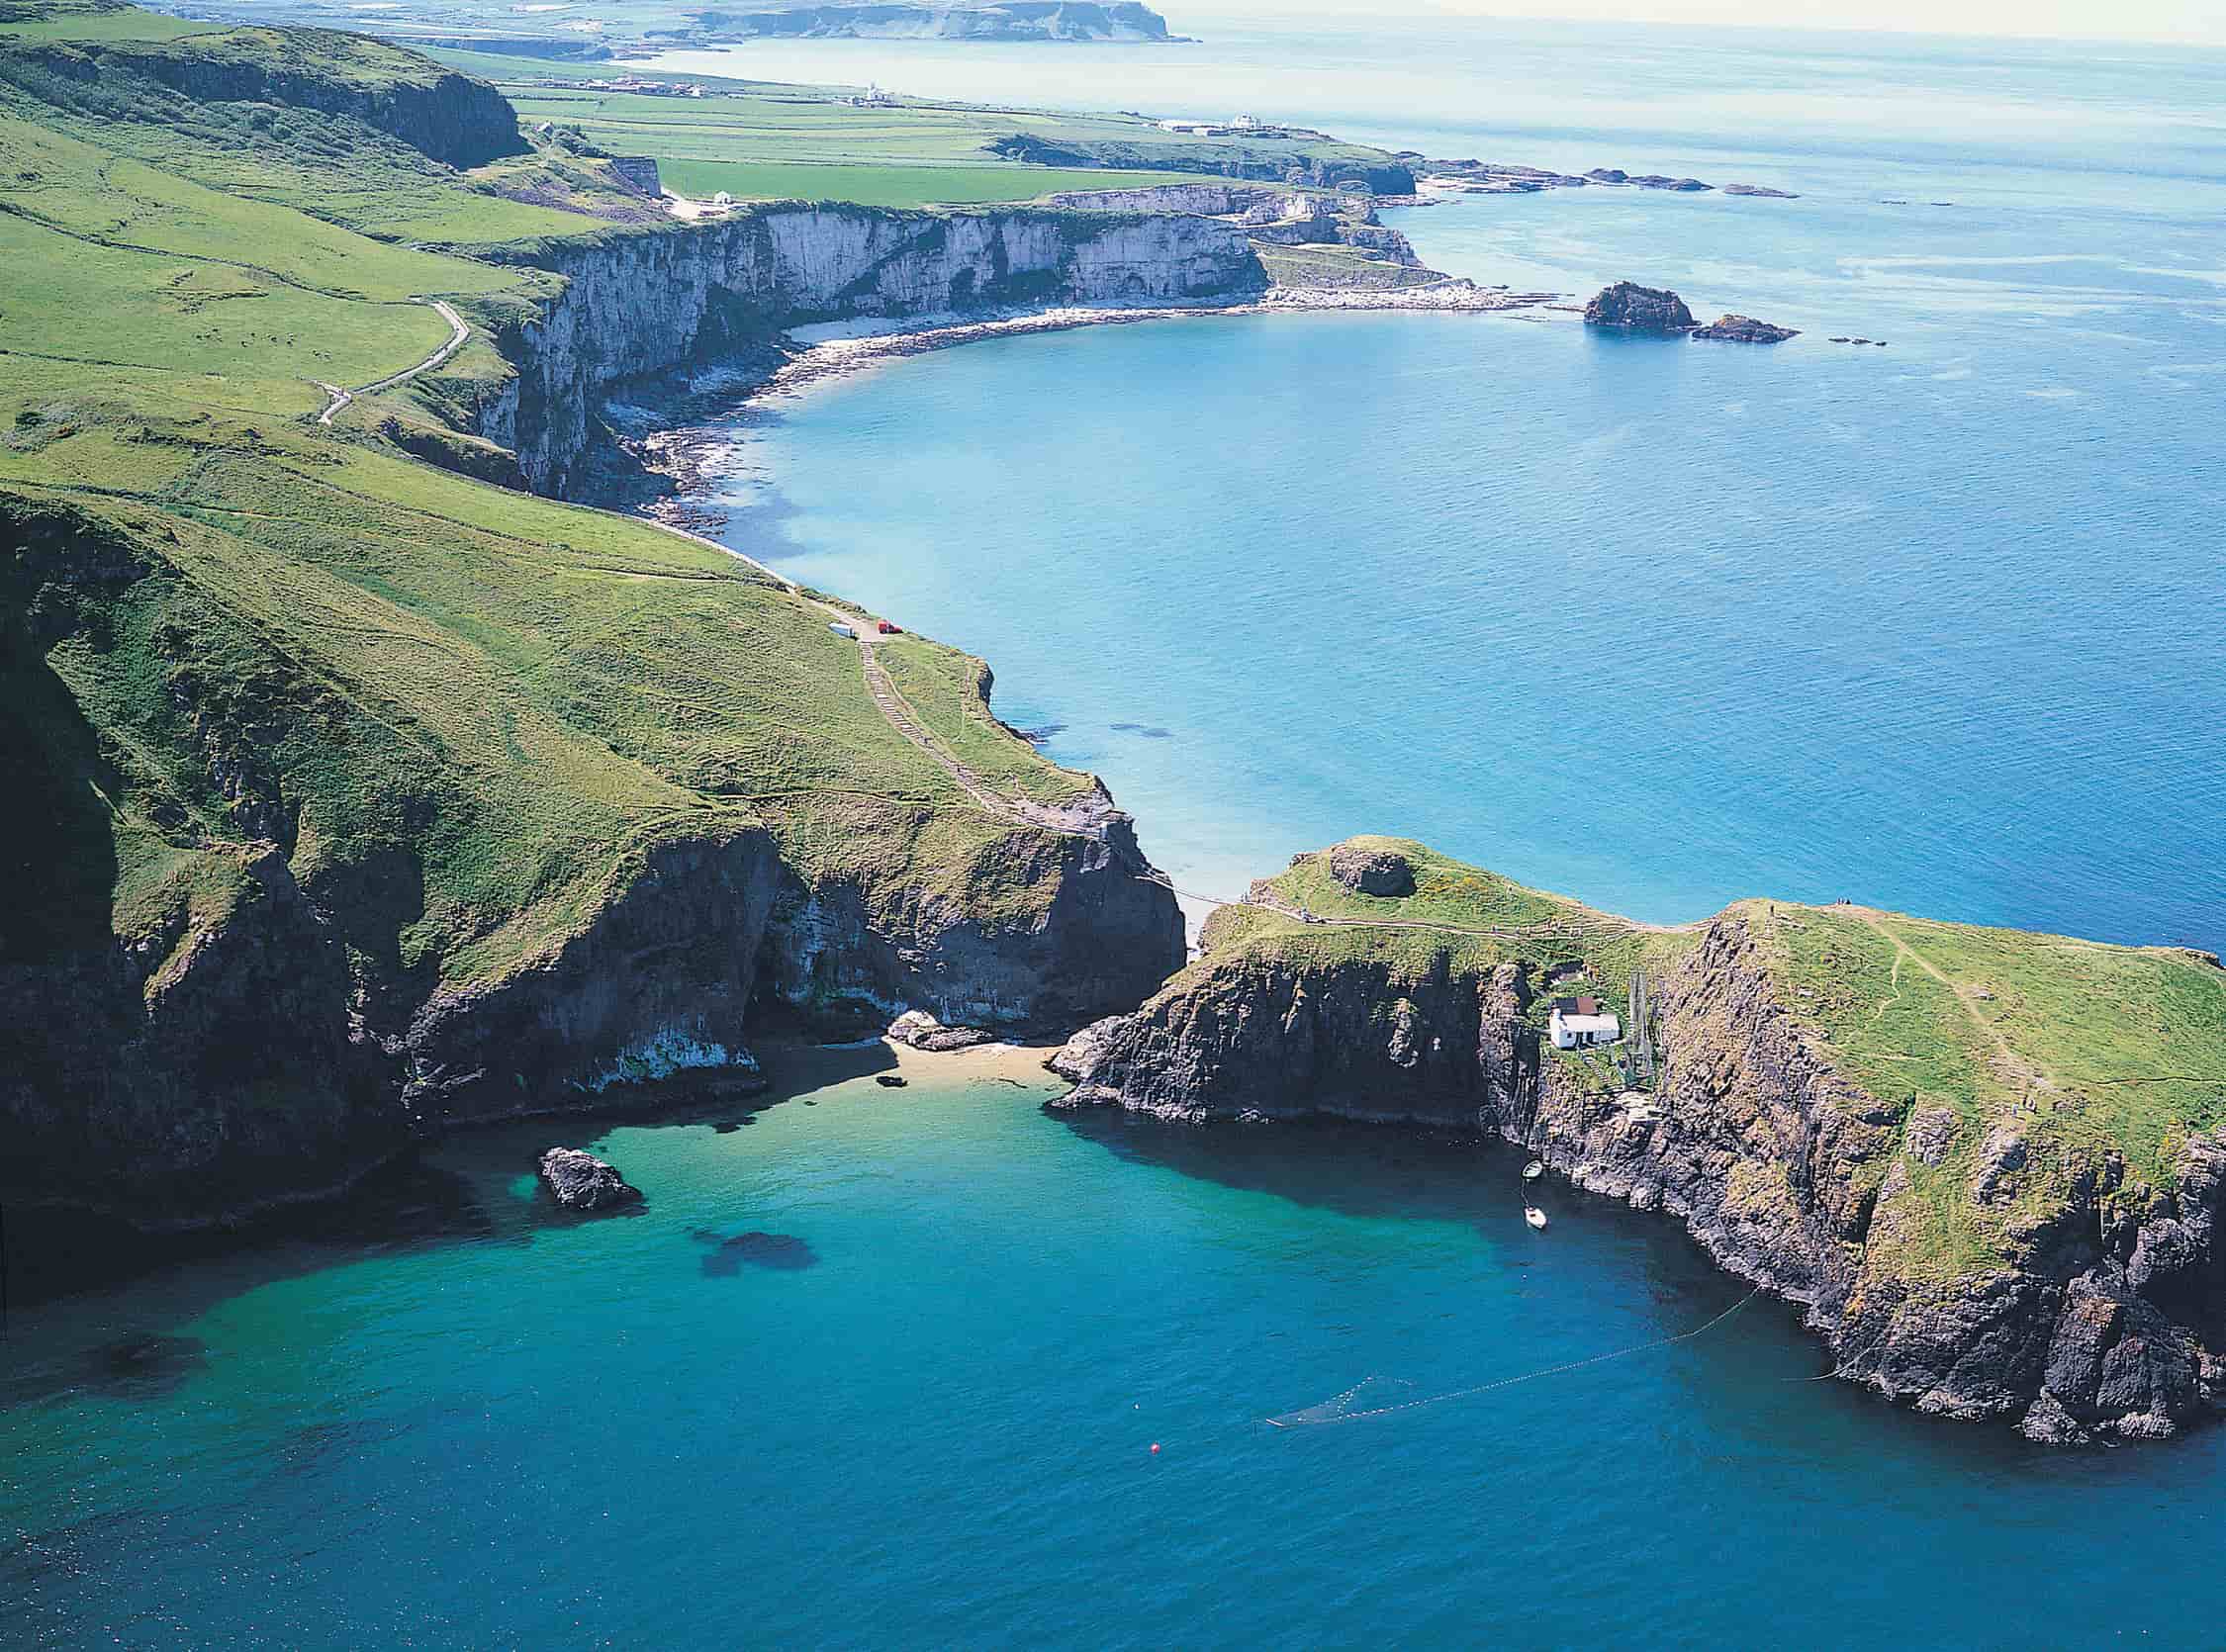 Carrick-a-Rede Aerial View